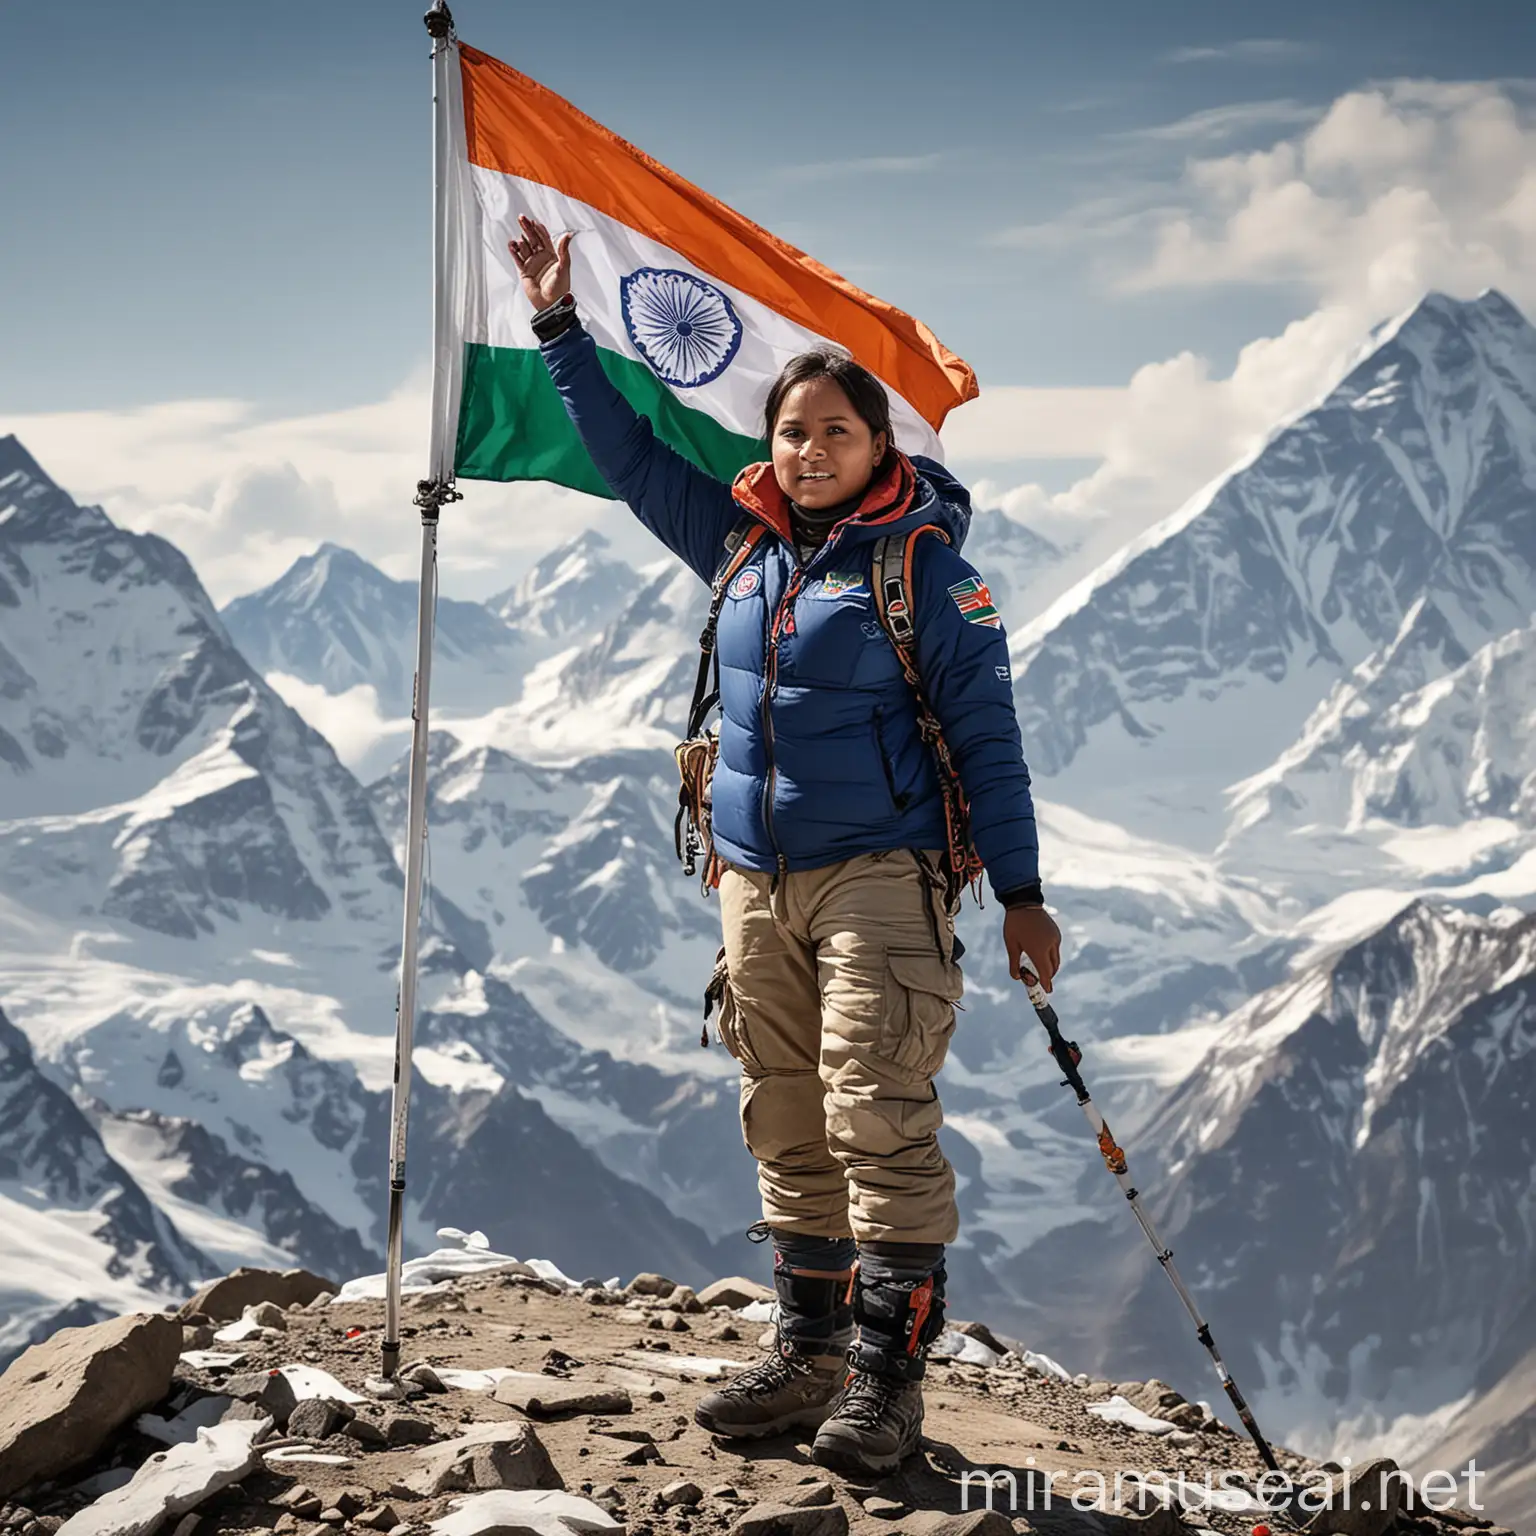 A powerful portrait of Arunima Sinha, the world's first female amputee to climb Mount Everest, standing triumphantly at the summit with the Indian flag